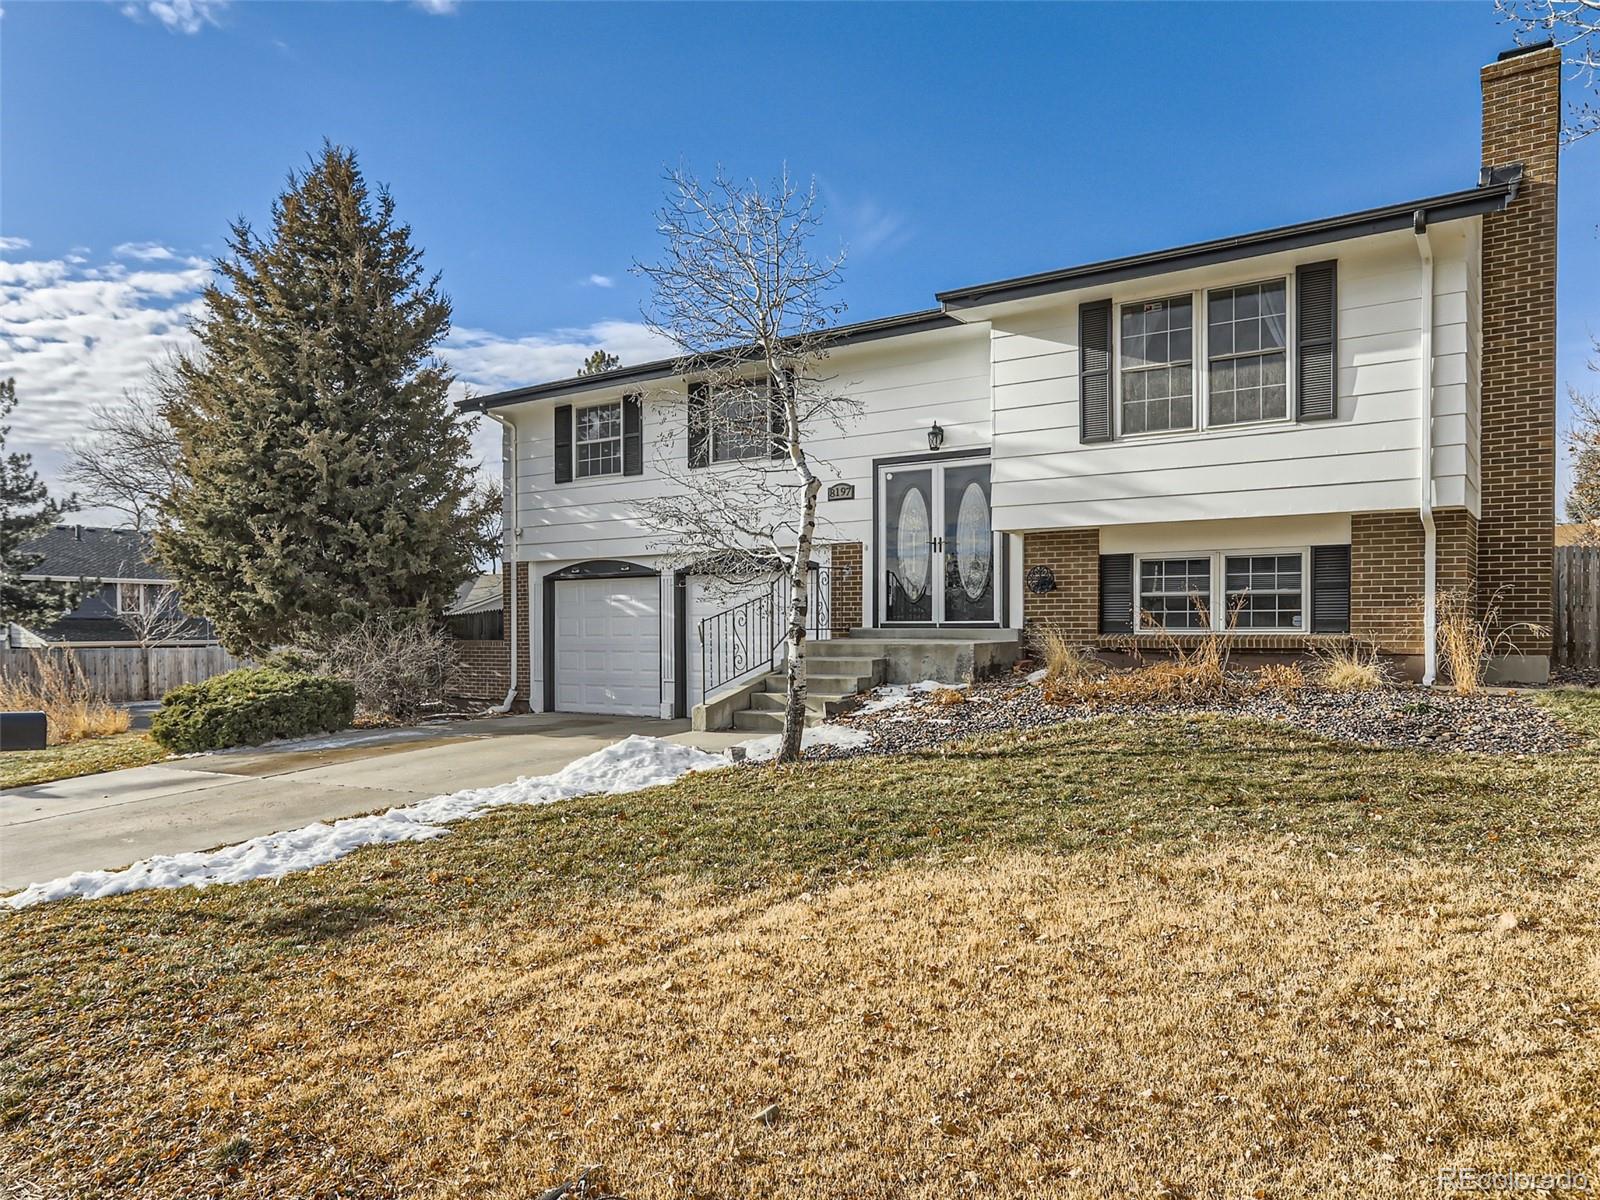 8197  dudley way, Arvada sold home. Closed on 2024-02-28 for $585,000.